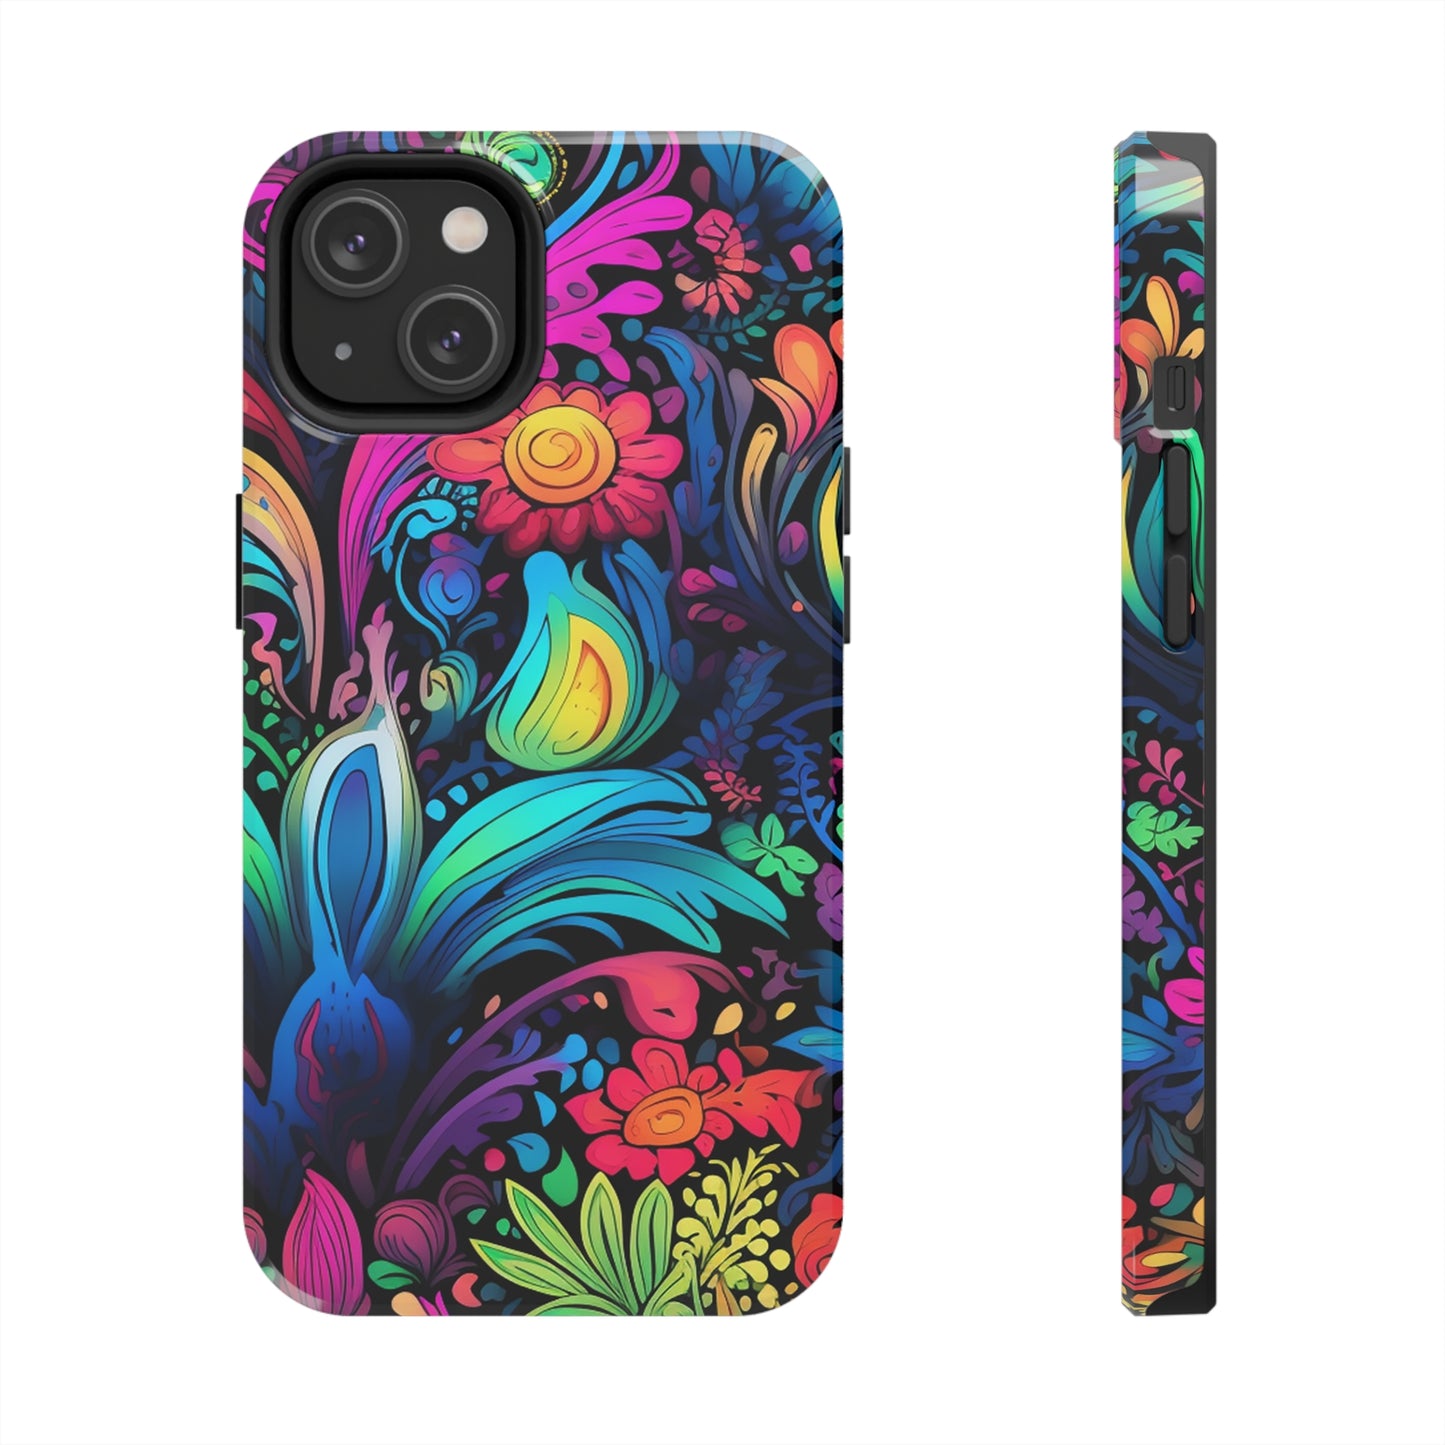 Psychedelic art iphone case